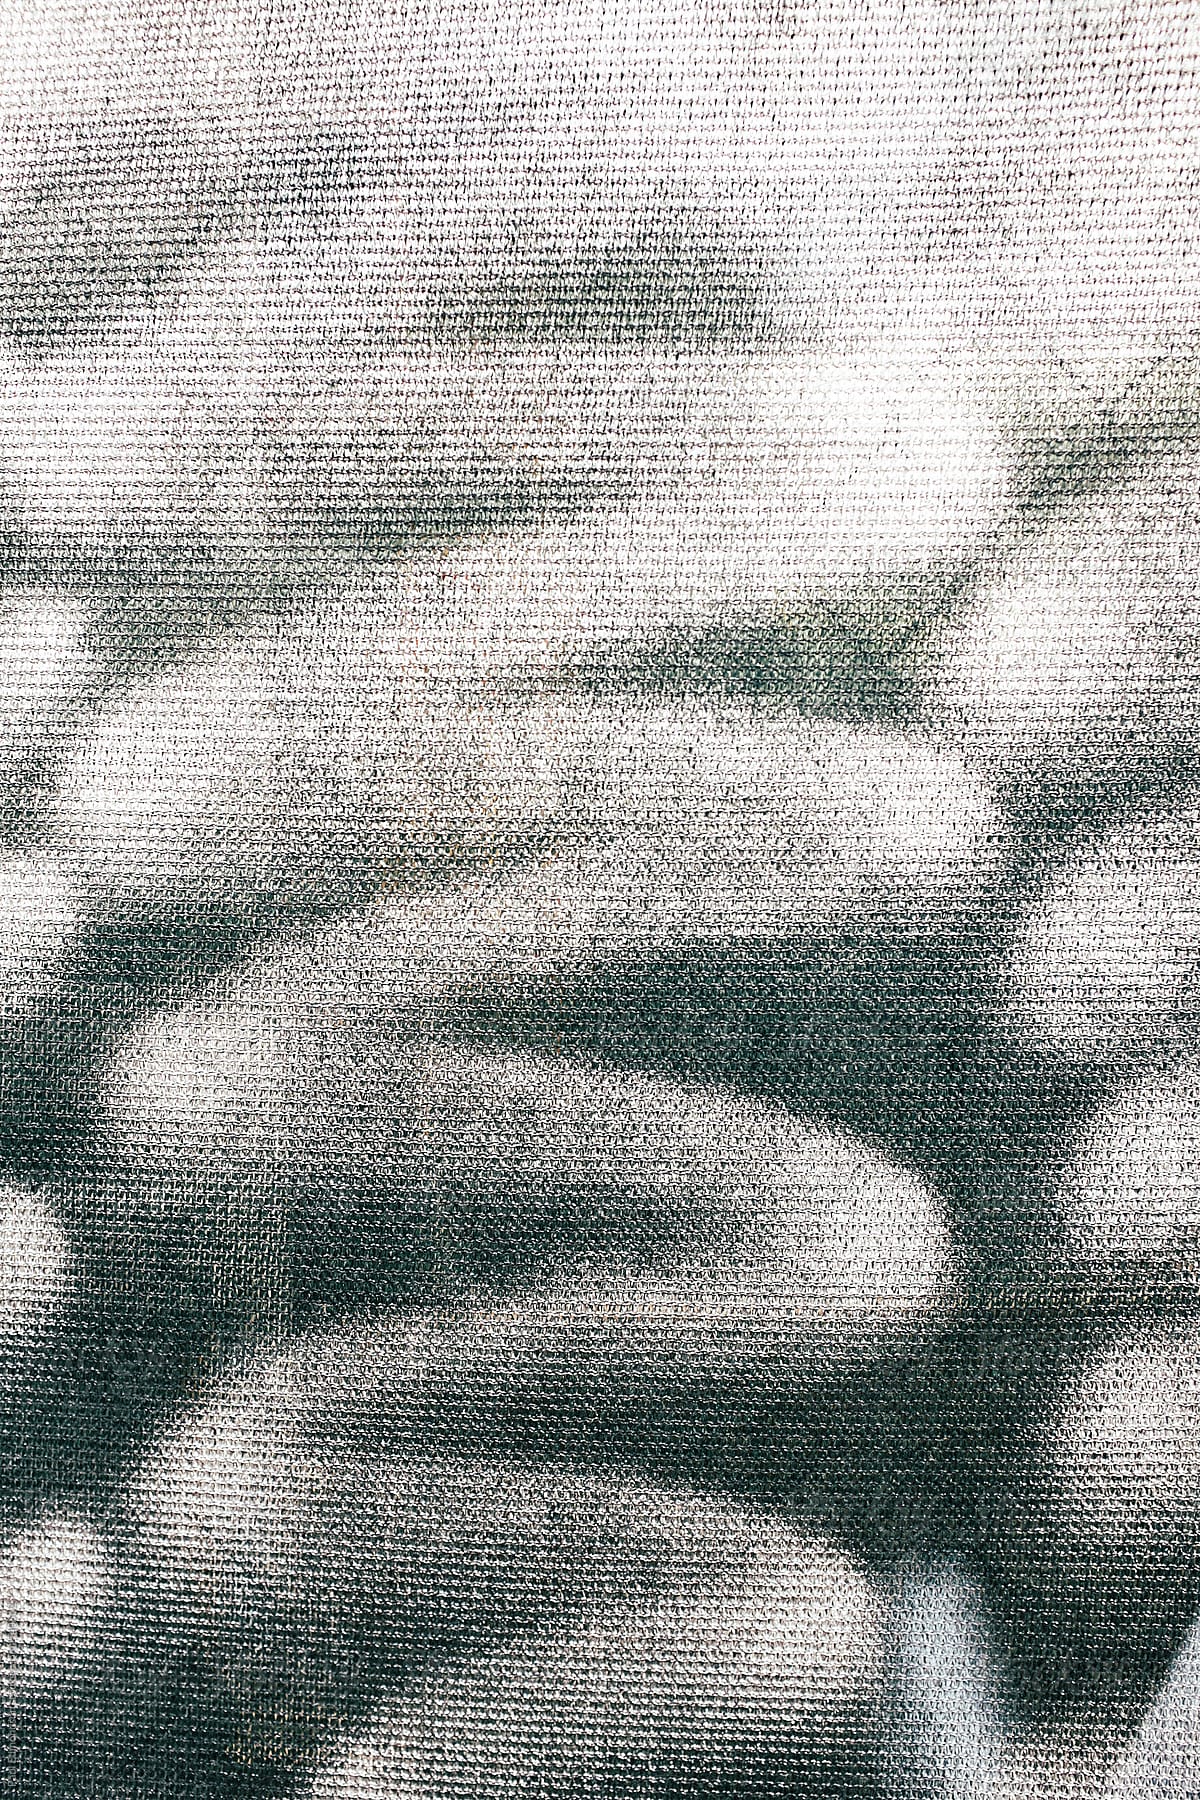 White spray paint markings covering graffiti tags on industrial fabric, close up